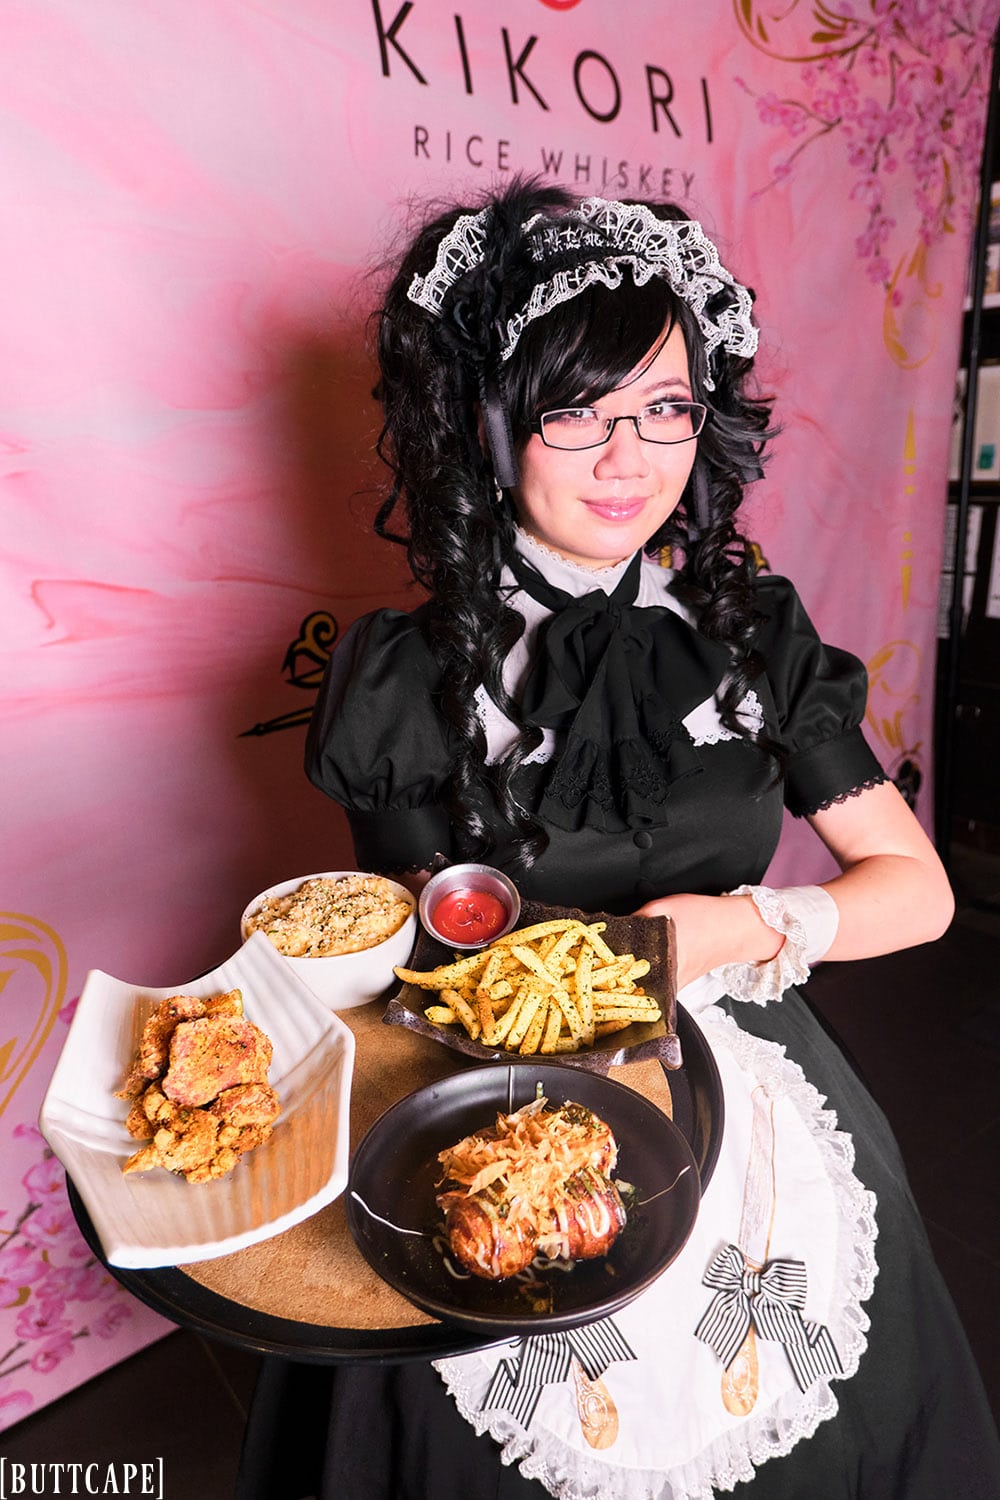 maid holding a tray of food.